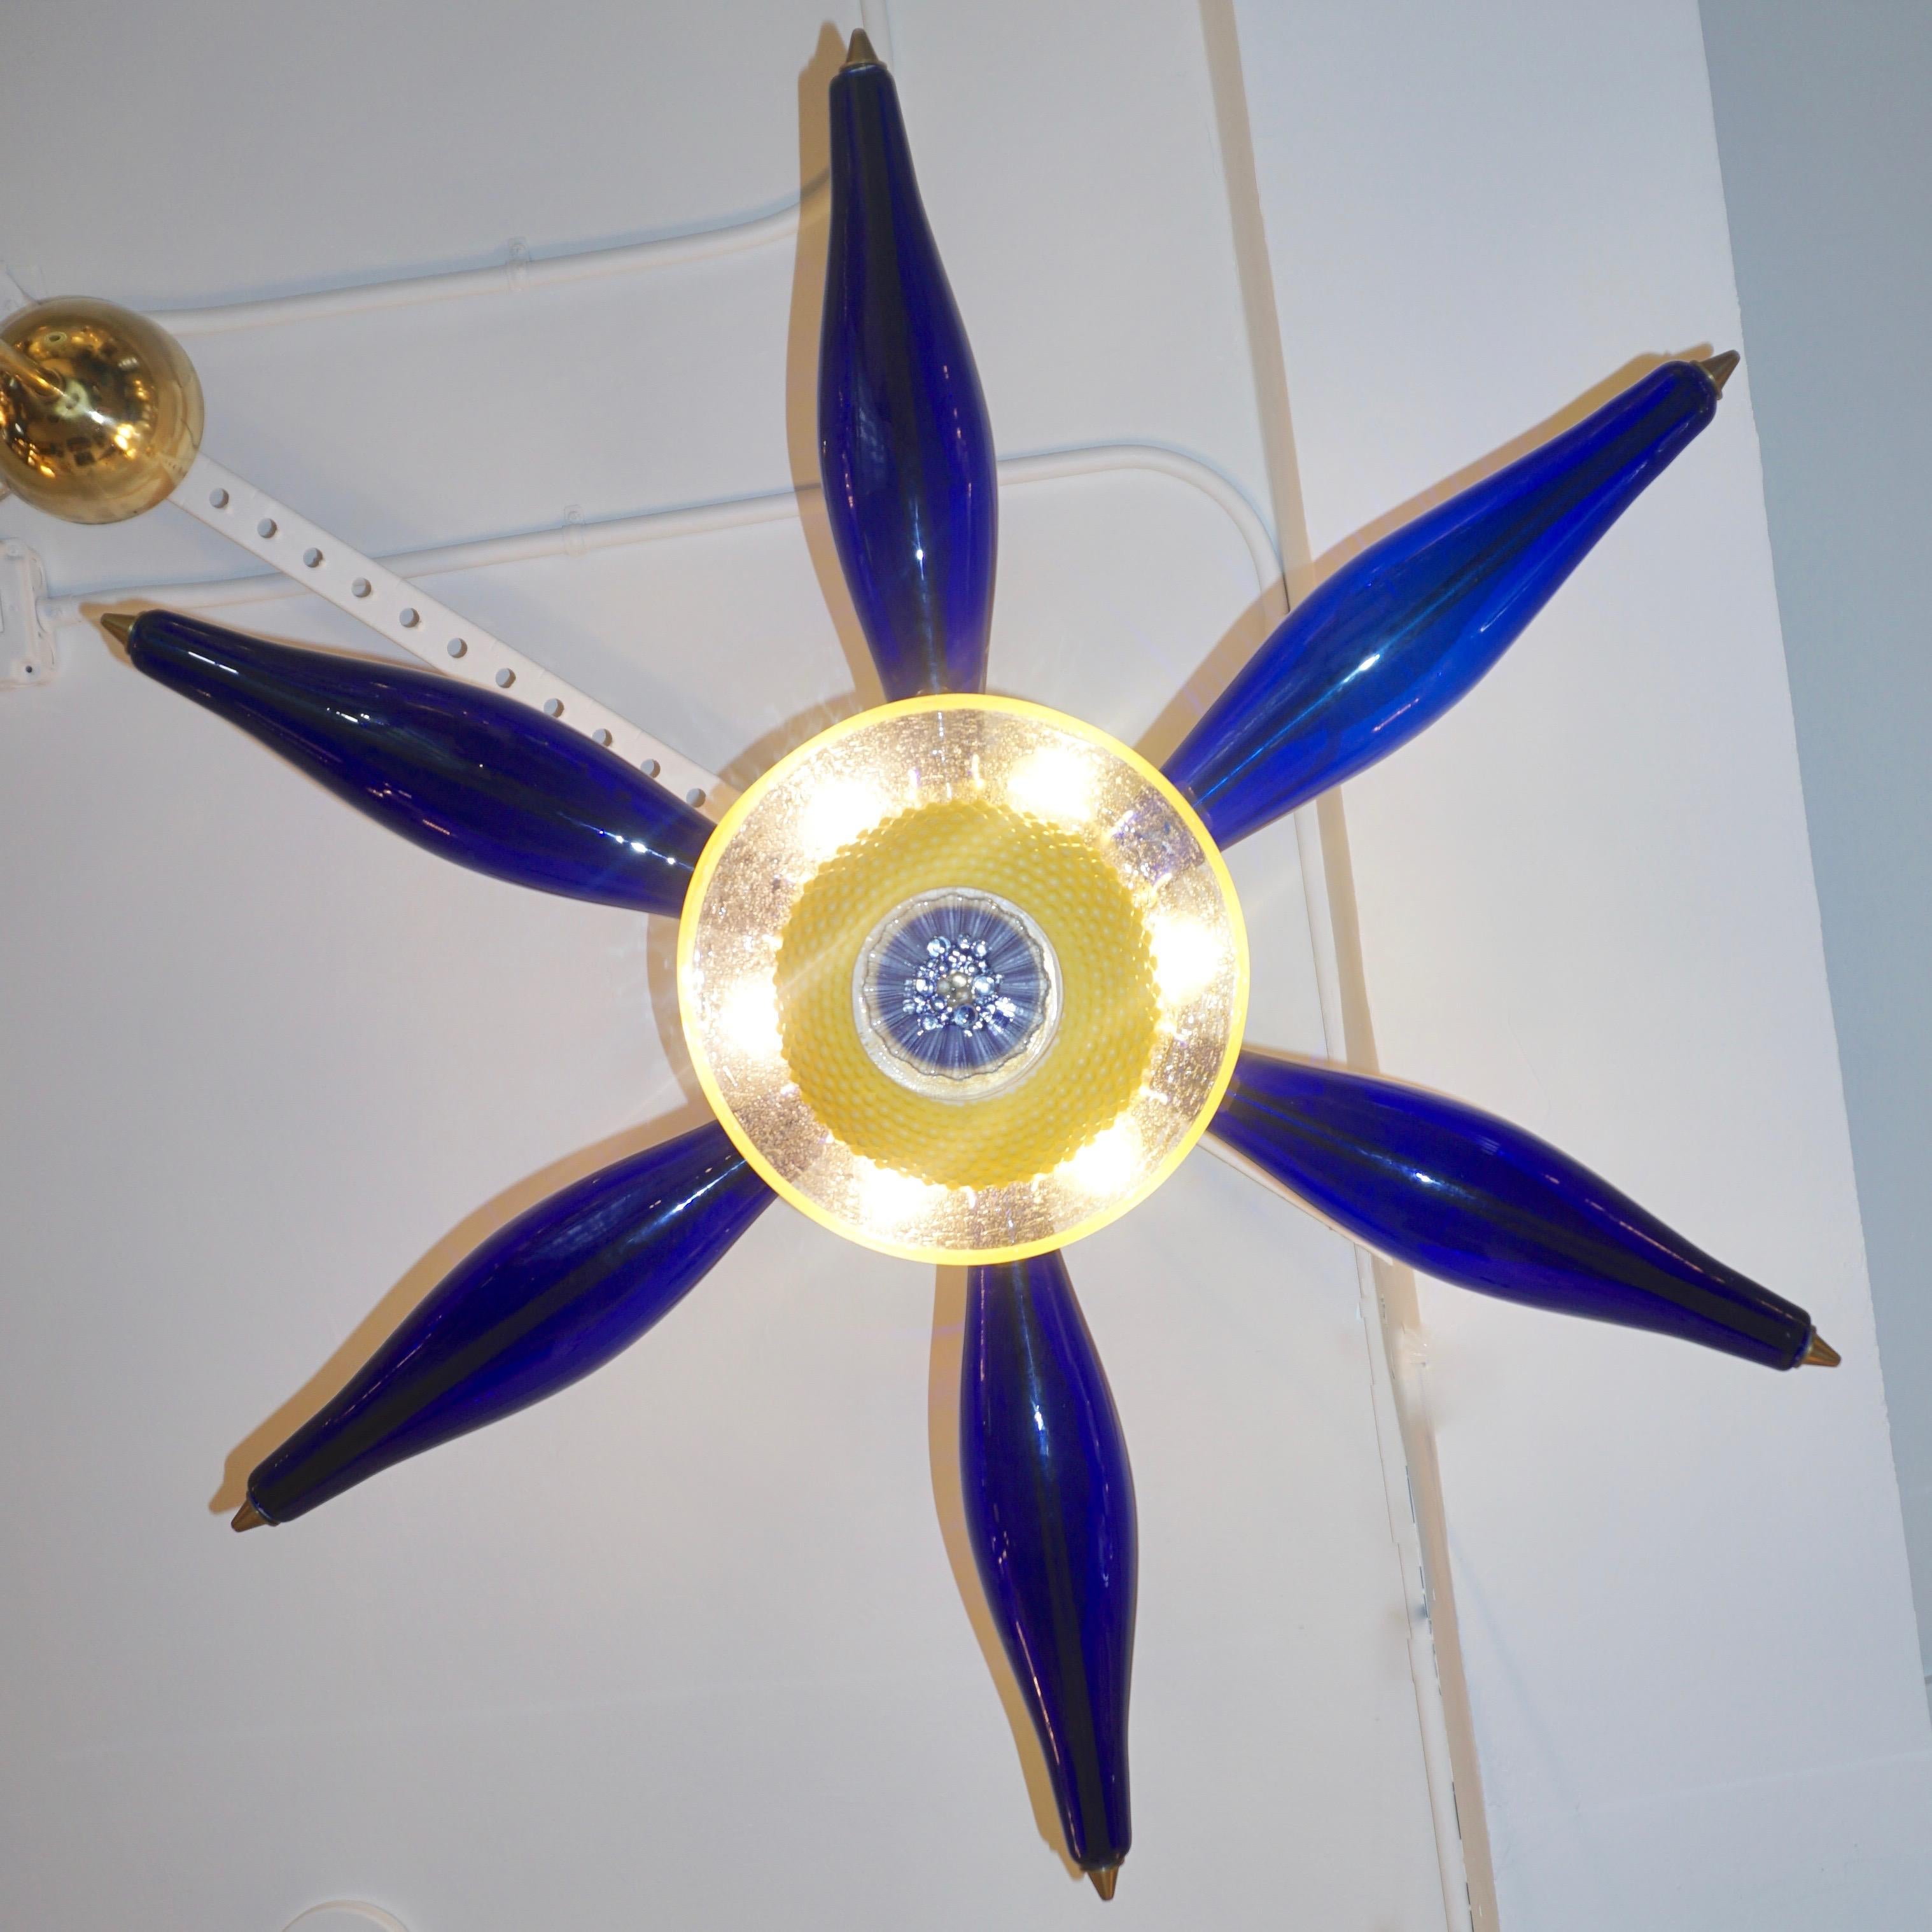 One-of-a-kind Italian design artistic pop art pendant, in the shape of a flower or six-point star. Six blown blue Murano glass elements, jutting out of a precious core consisting of rare yellow and clear Murano glass components executed through